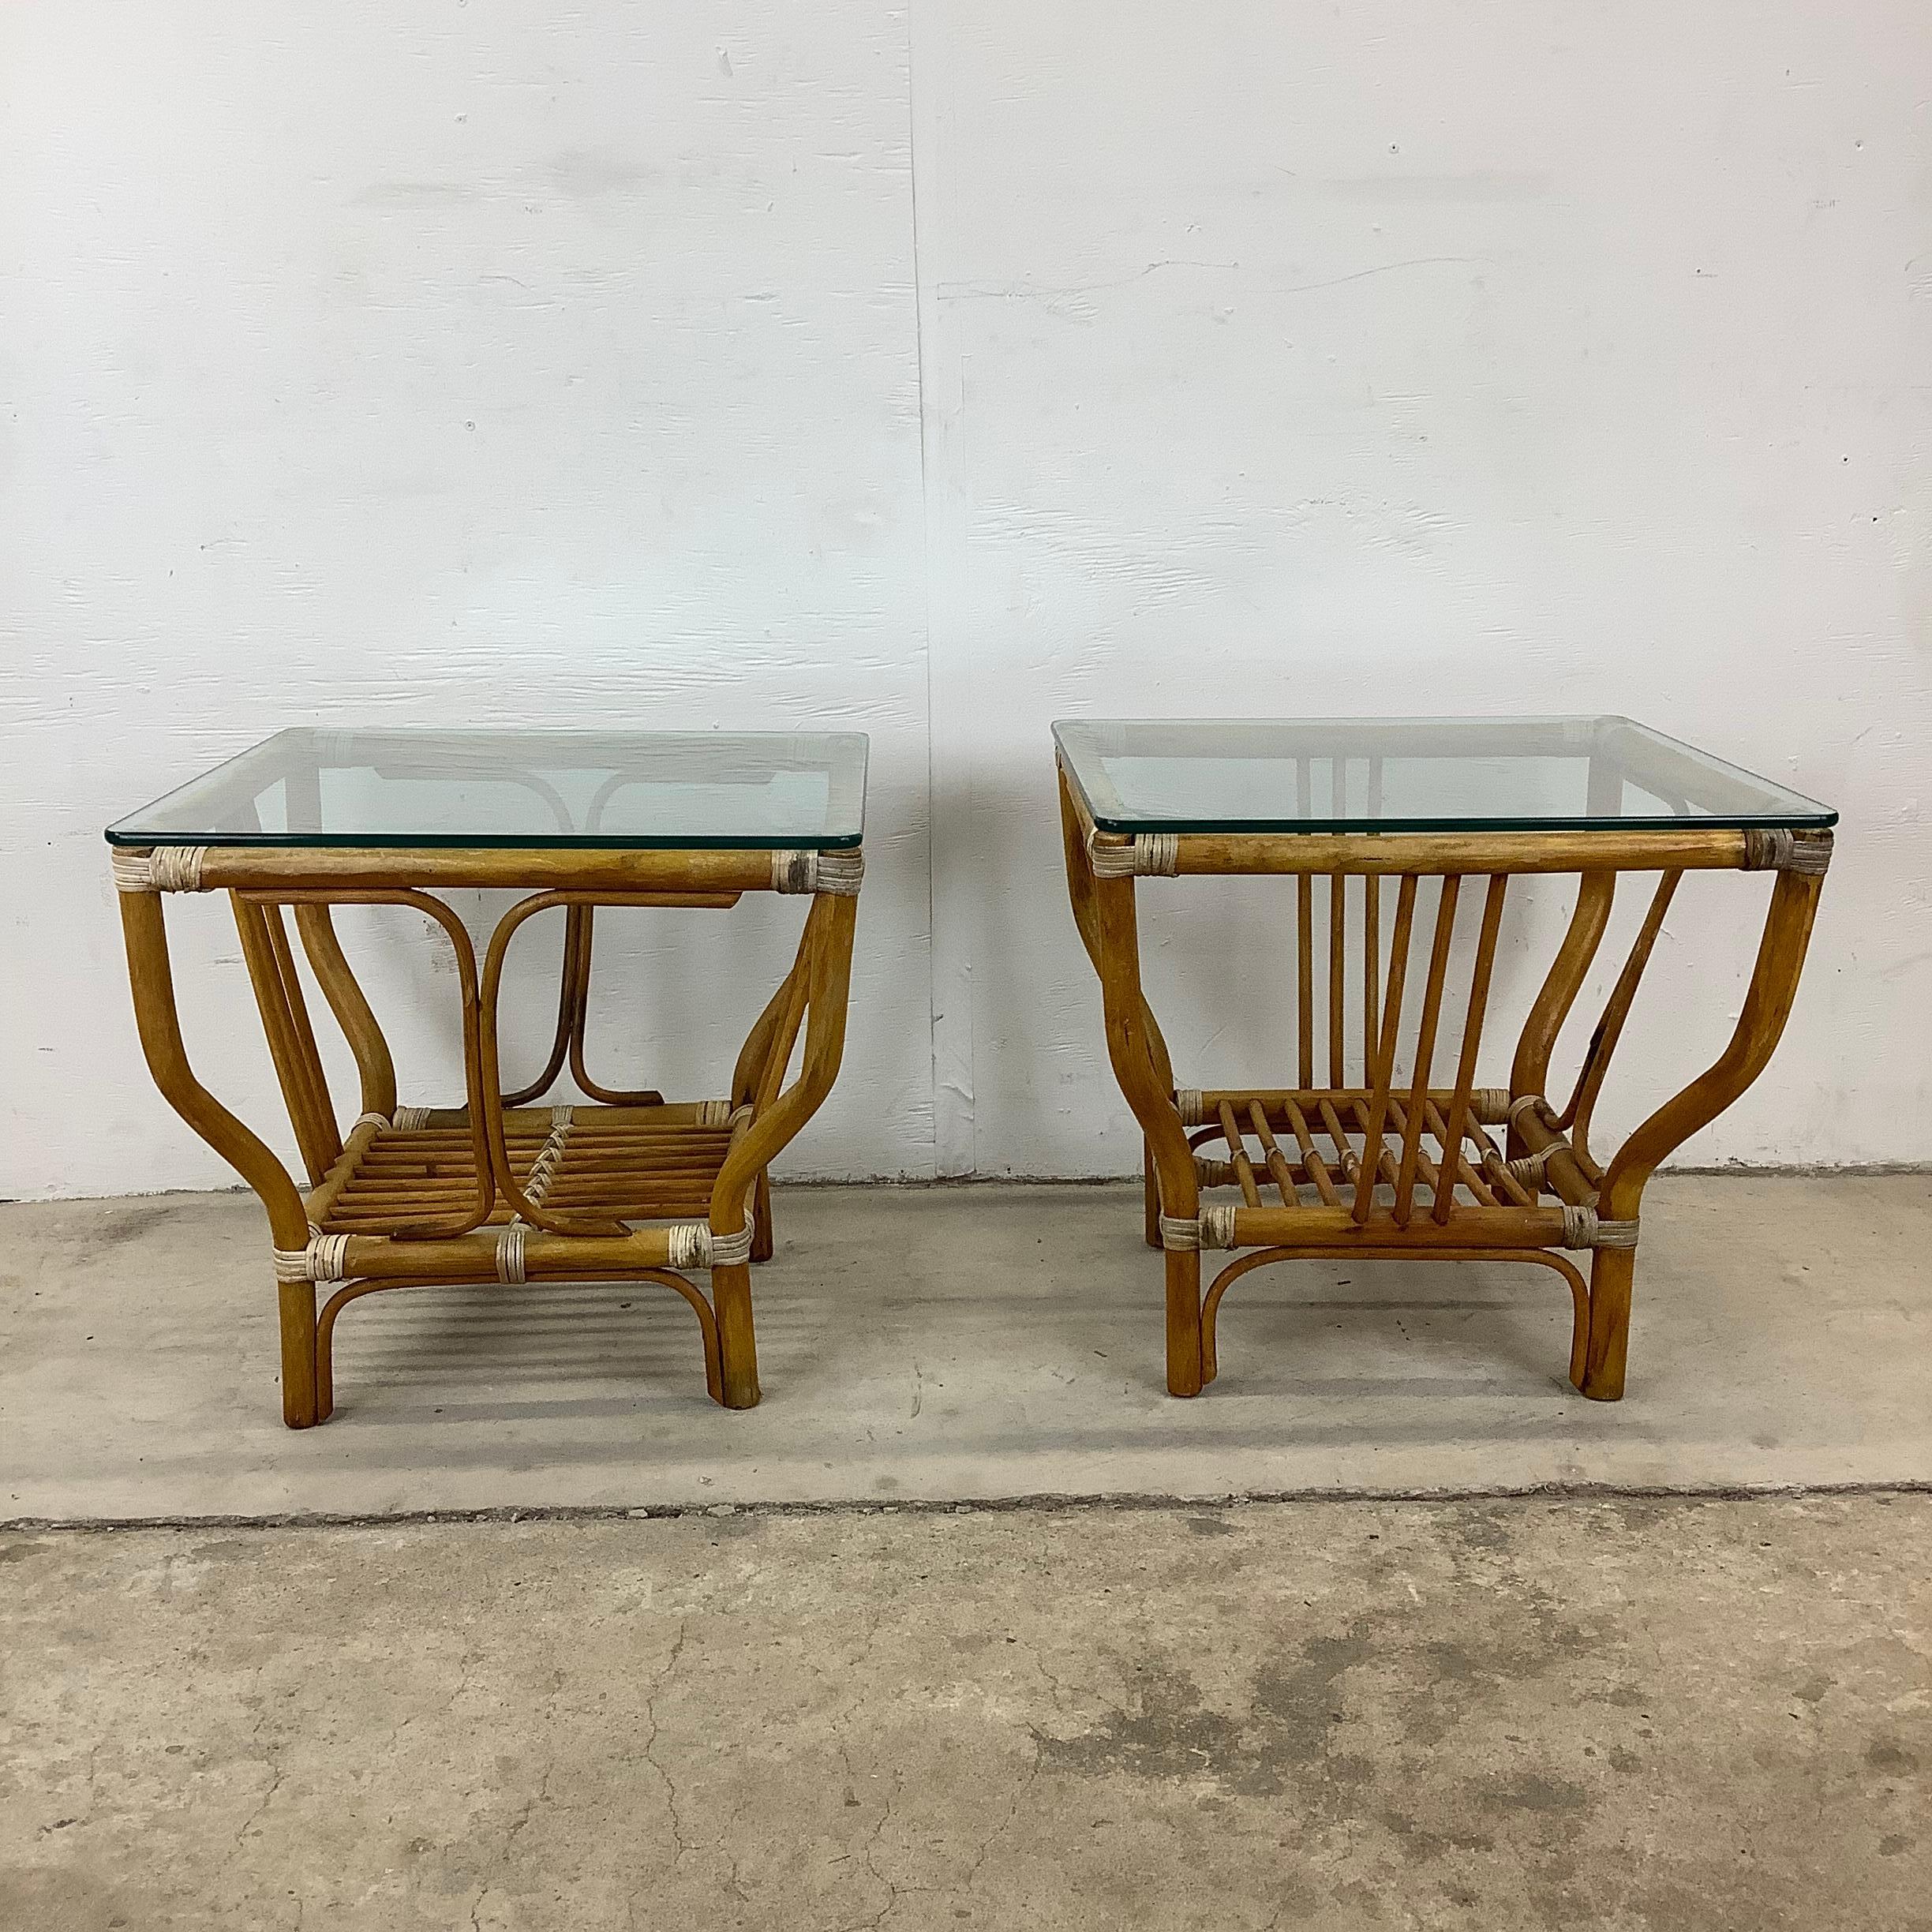 This stylish pair of end tables features boho modern sculptural bamboo design with thick glass tops. The vintage natural finish adds organic retro vibes to any interior, perfect pair of side tables for use as sofa lamp tables or any interior.